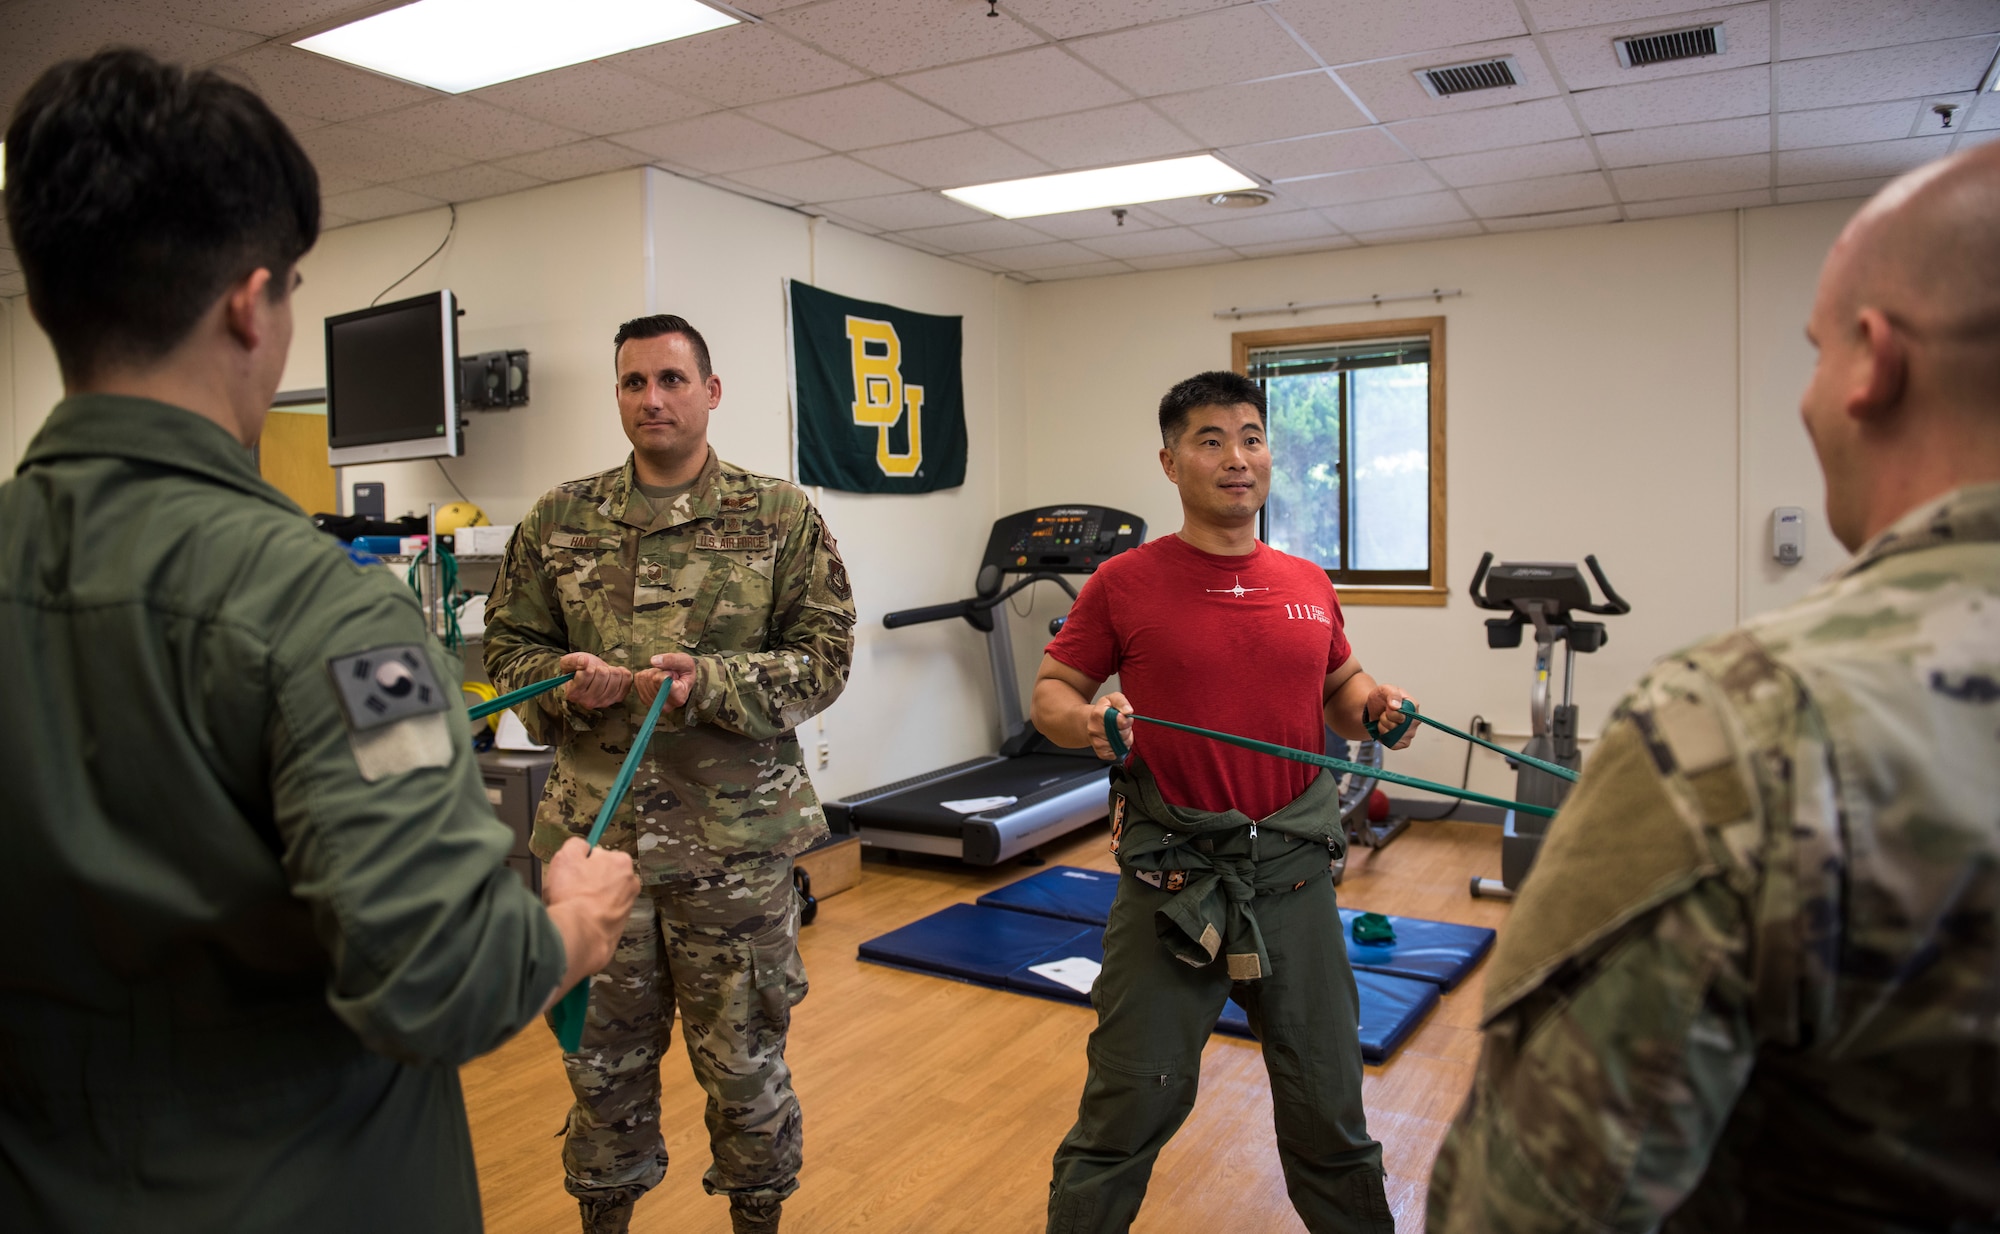 U.S. Air Force Tech. Sgt. Nicholas Ramirez (far right), 8th Medical Operations Squadron physical therapy flight chief, and Master Sgt. Joshua Haney (middle left), 8th Medical Operations Squadron superintendent, teach pilots from Republic of Korea Air Force’s 111th Fighter Squadron how to stretch their backs during a training session at Kunsan Air Base, Republic of Korea, Aug. 9, 2019. Pilots often find themselves developing pain in different areas from regularly putting their bodies under high amounts of gravitational forces. (U.S. Air Force photo by Senior Airman Stefan Alvarez)